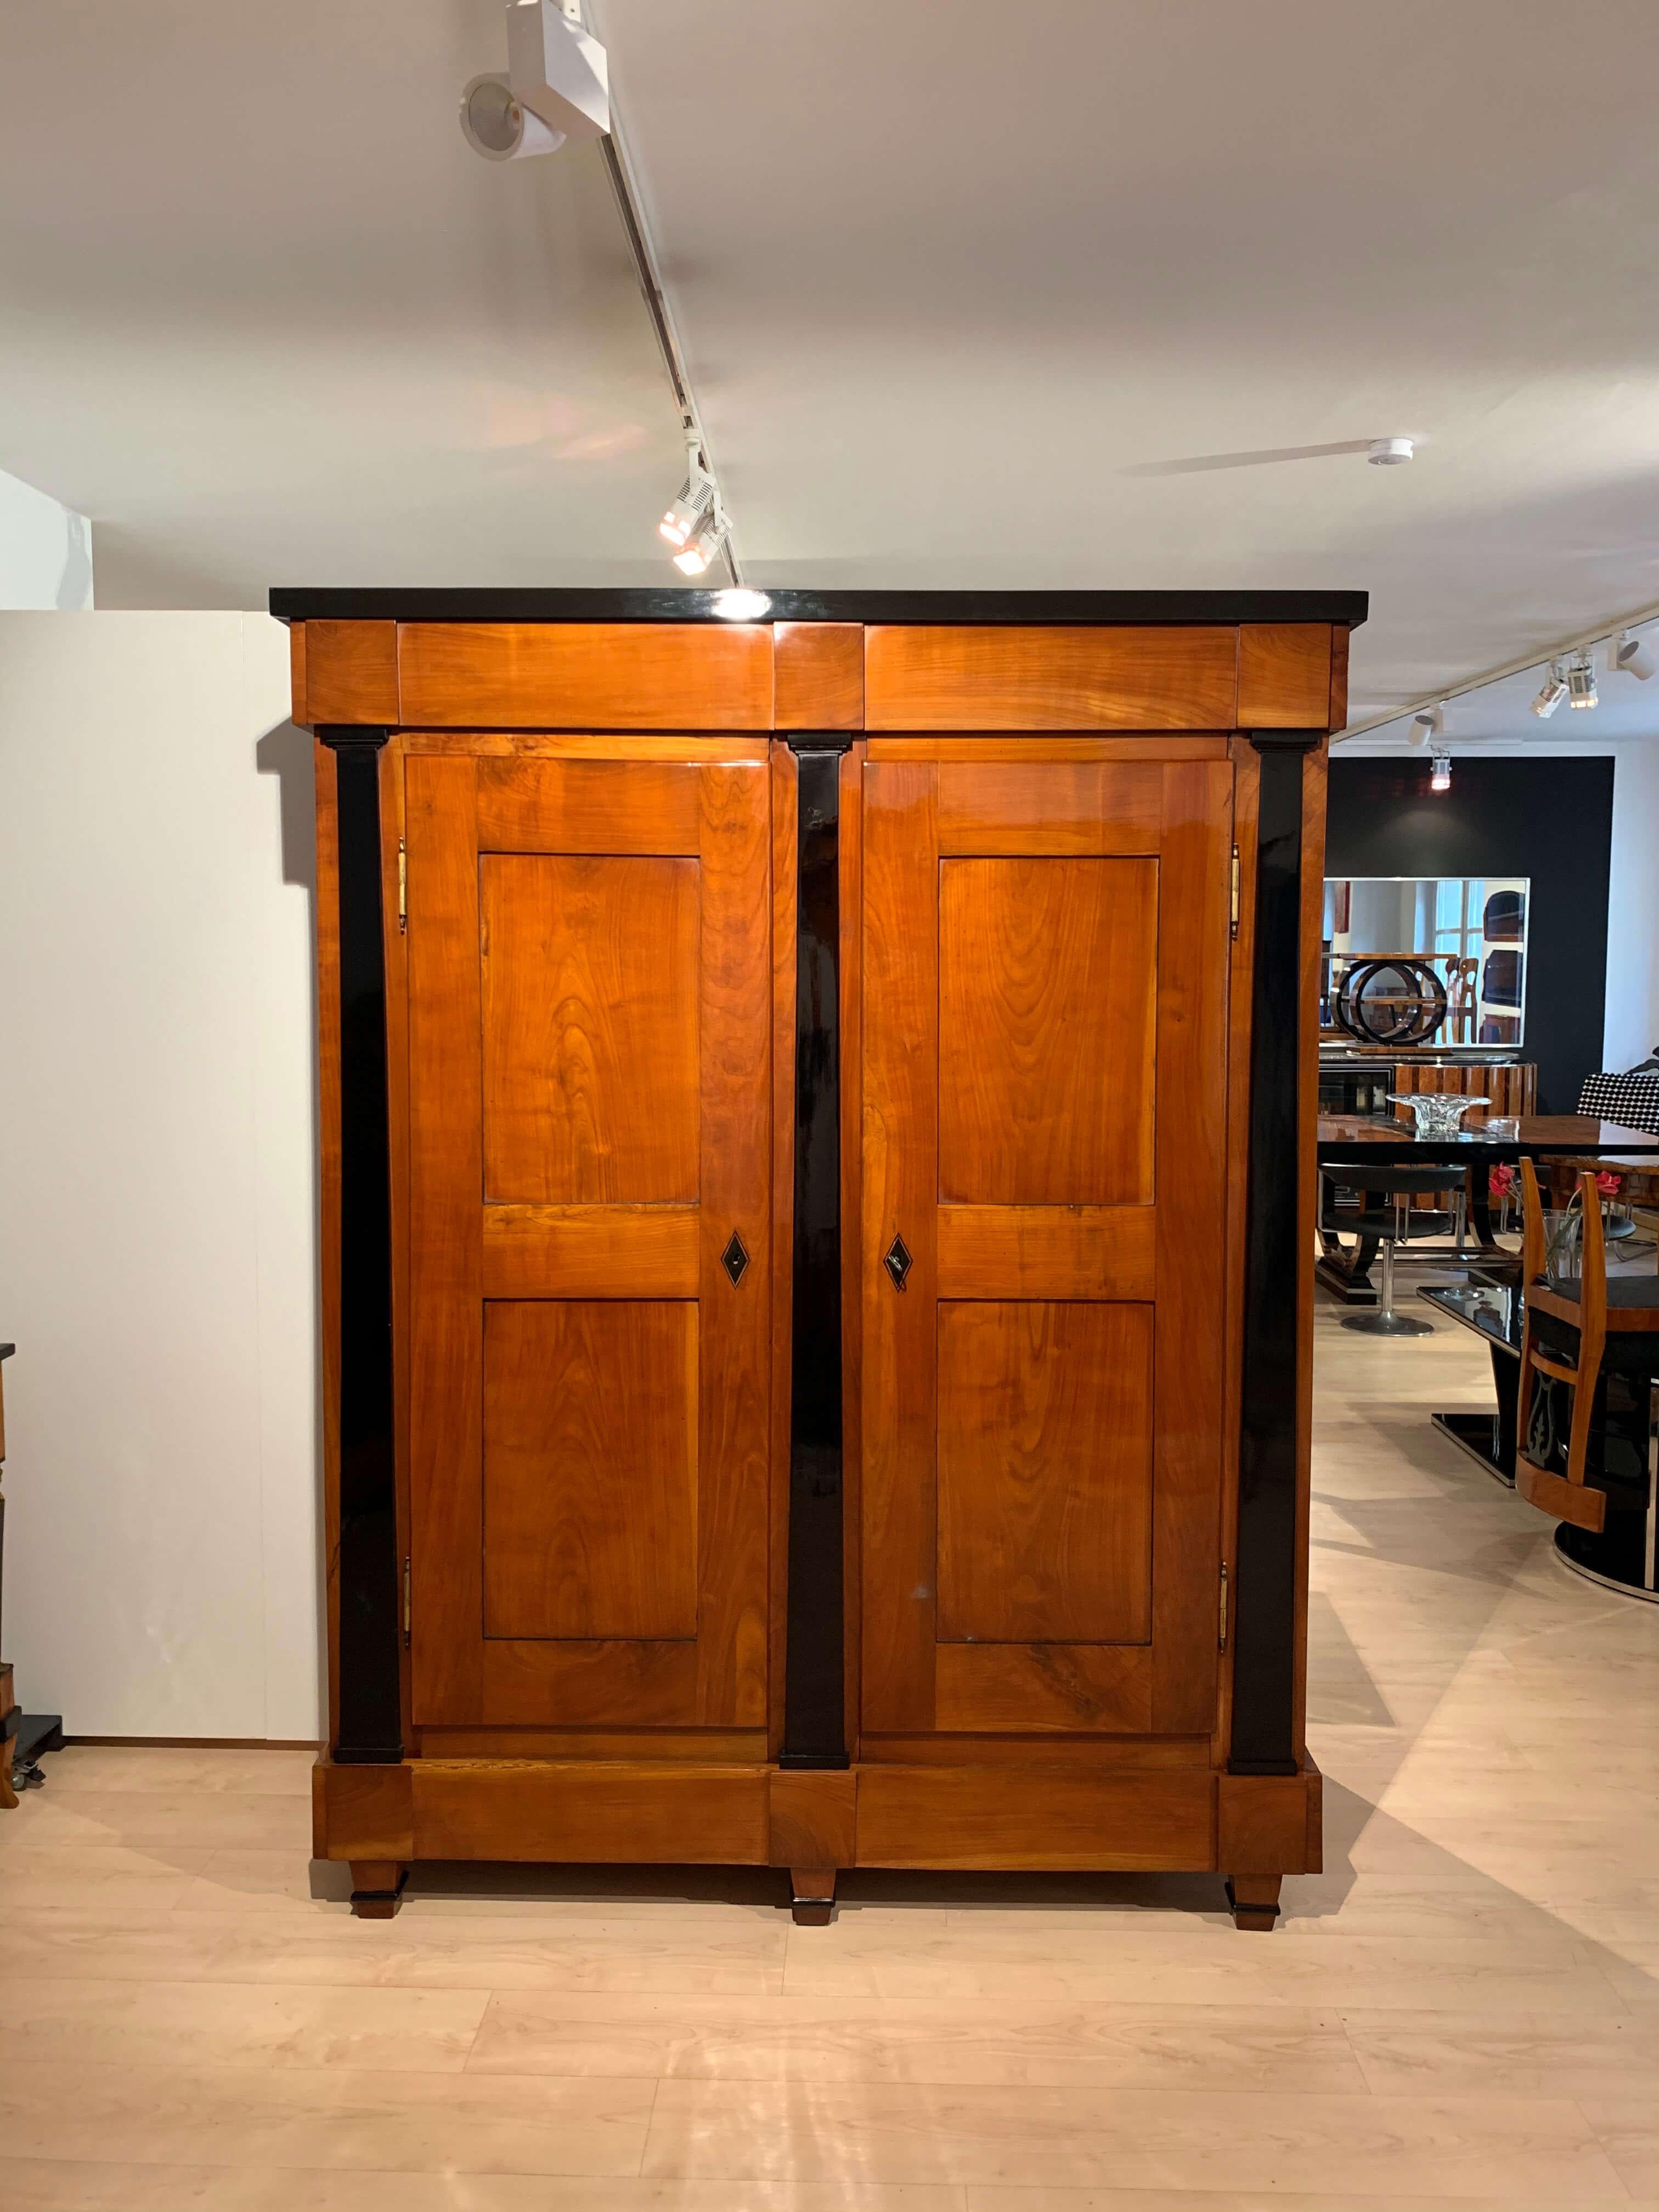 Elegant, large neoclassical, restored early Biedermeier Armoire from Southwest Germany around 1820.

Solid cherry tree, hand polished with shellac (French polished) and partly ebonized. Each two fillings on one door and side.
Three ebonized,